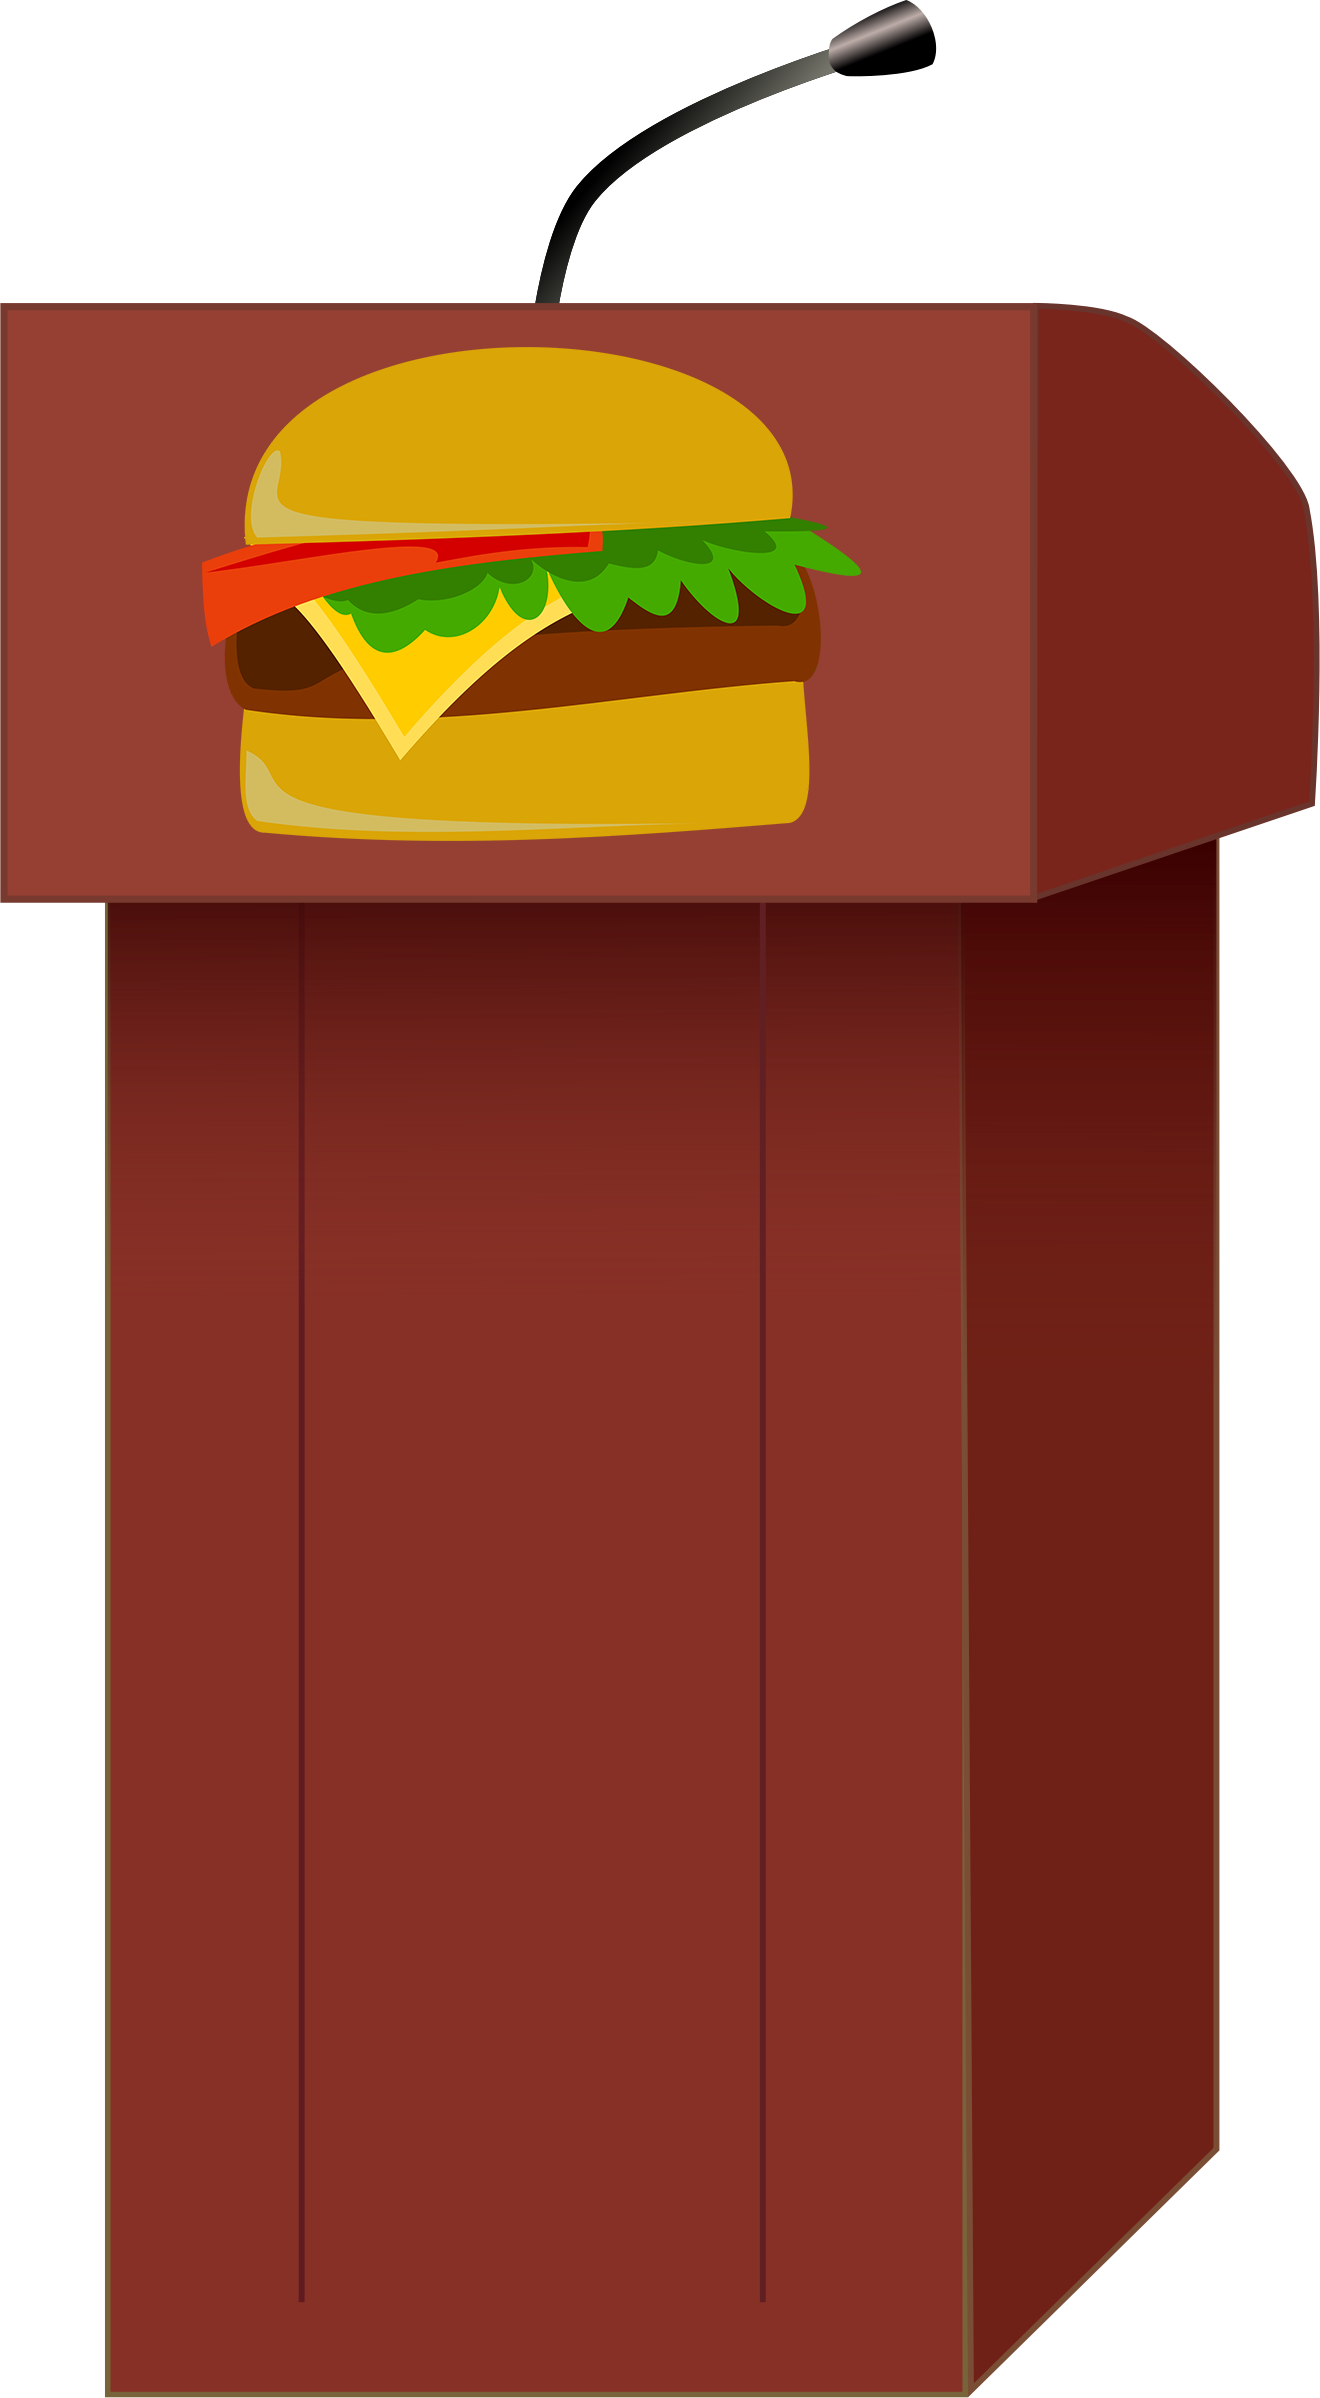 What Did Snapps Do To Try To Achieve These Objectives - You Had Me At Cheeseburger (1320x2398)